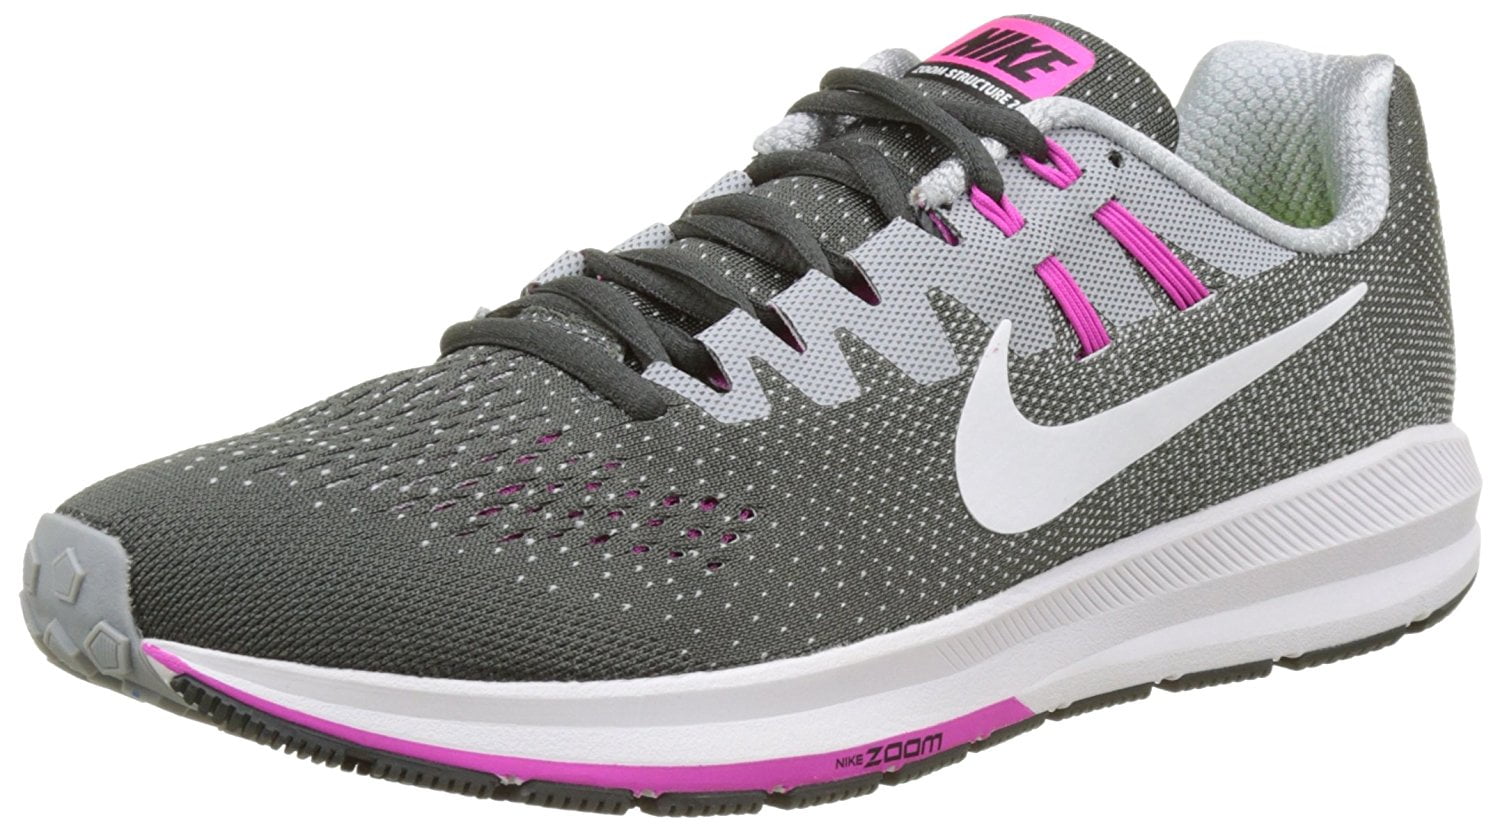 NIKE Women's Air Zoom Structure Running Shoe, 12W US, Anthracite/Wolf Grey/Fire Pink/White -